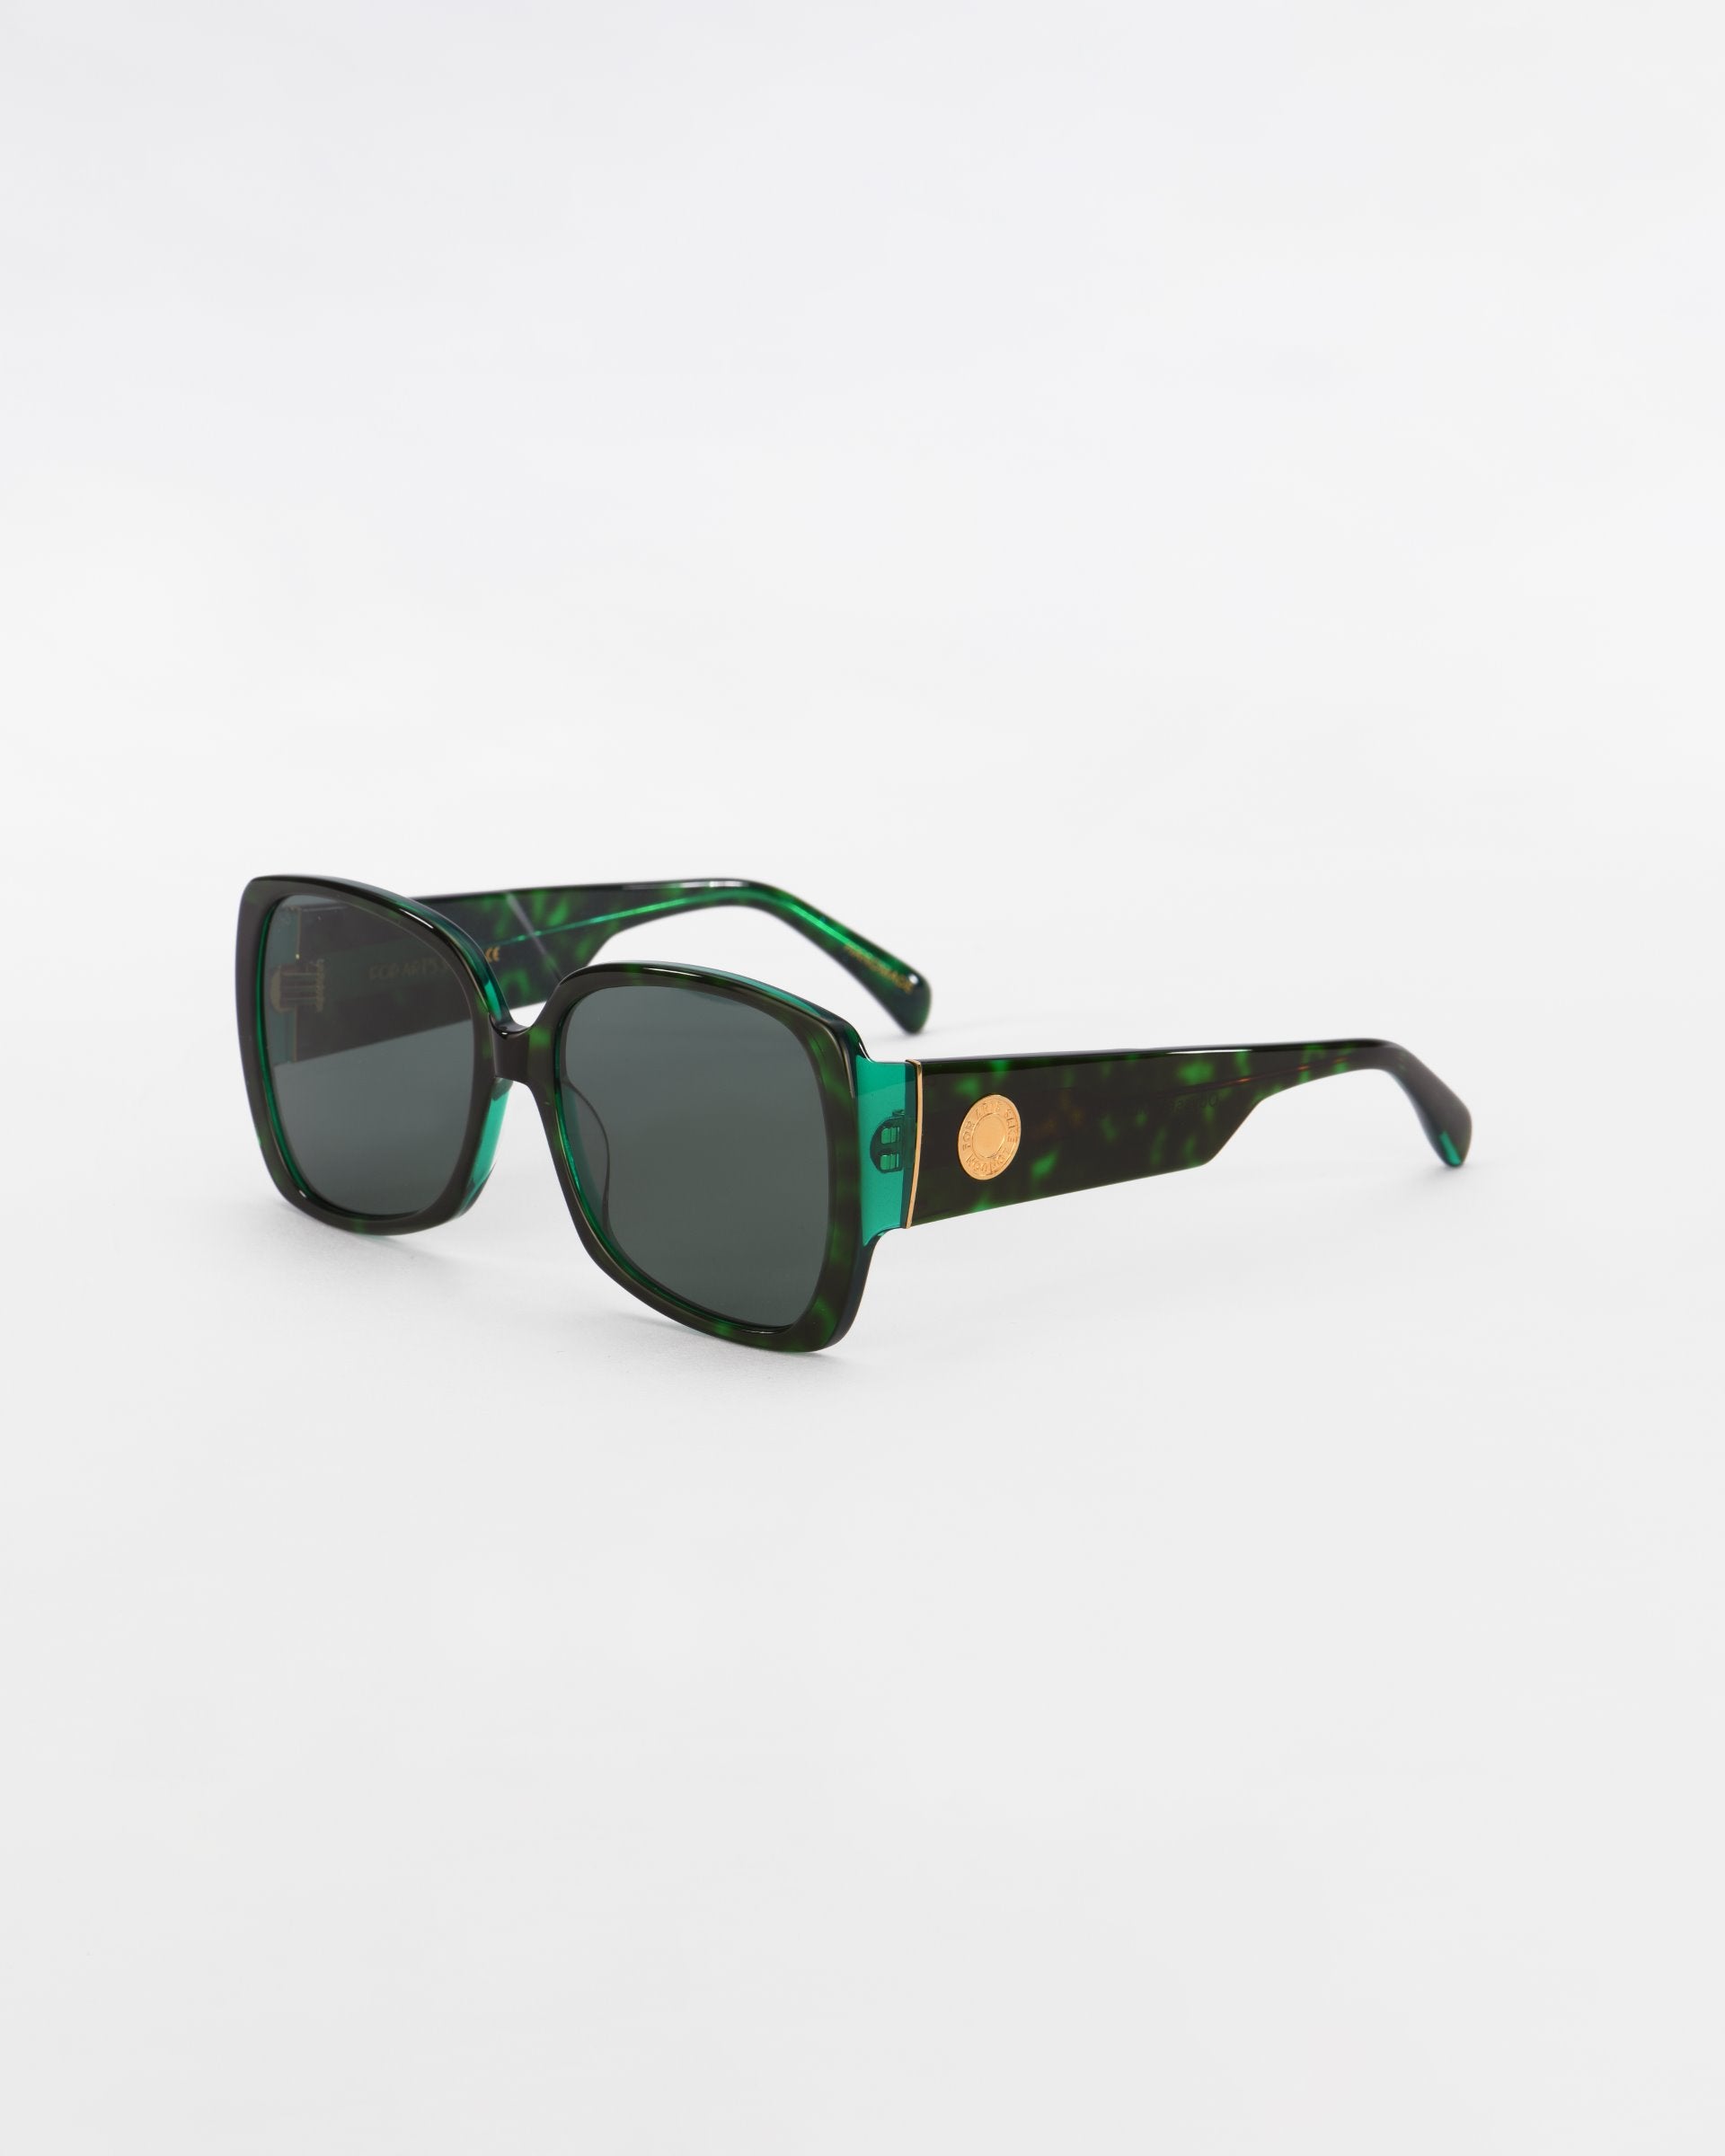 A pair of dark green tortoiseshell pattern Odyssey sunglasses by For Art&#39;s Sake® with large, square frames and lightweight nylon lenses. The temples are thick and feature a small circular emblem with 18-karat gold plating near the hinges. The background is plain white.